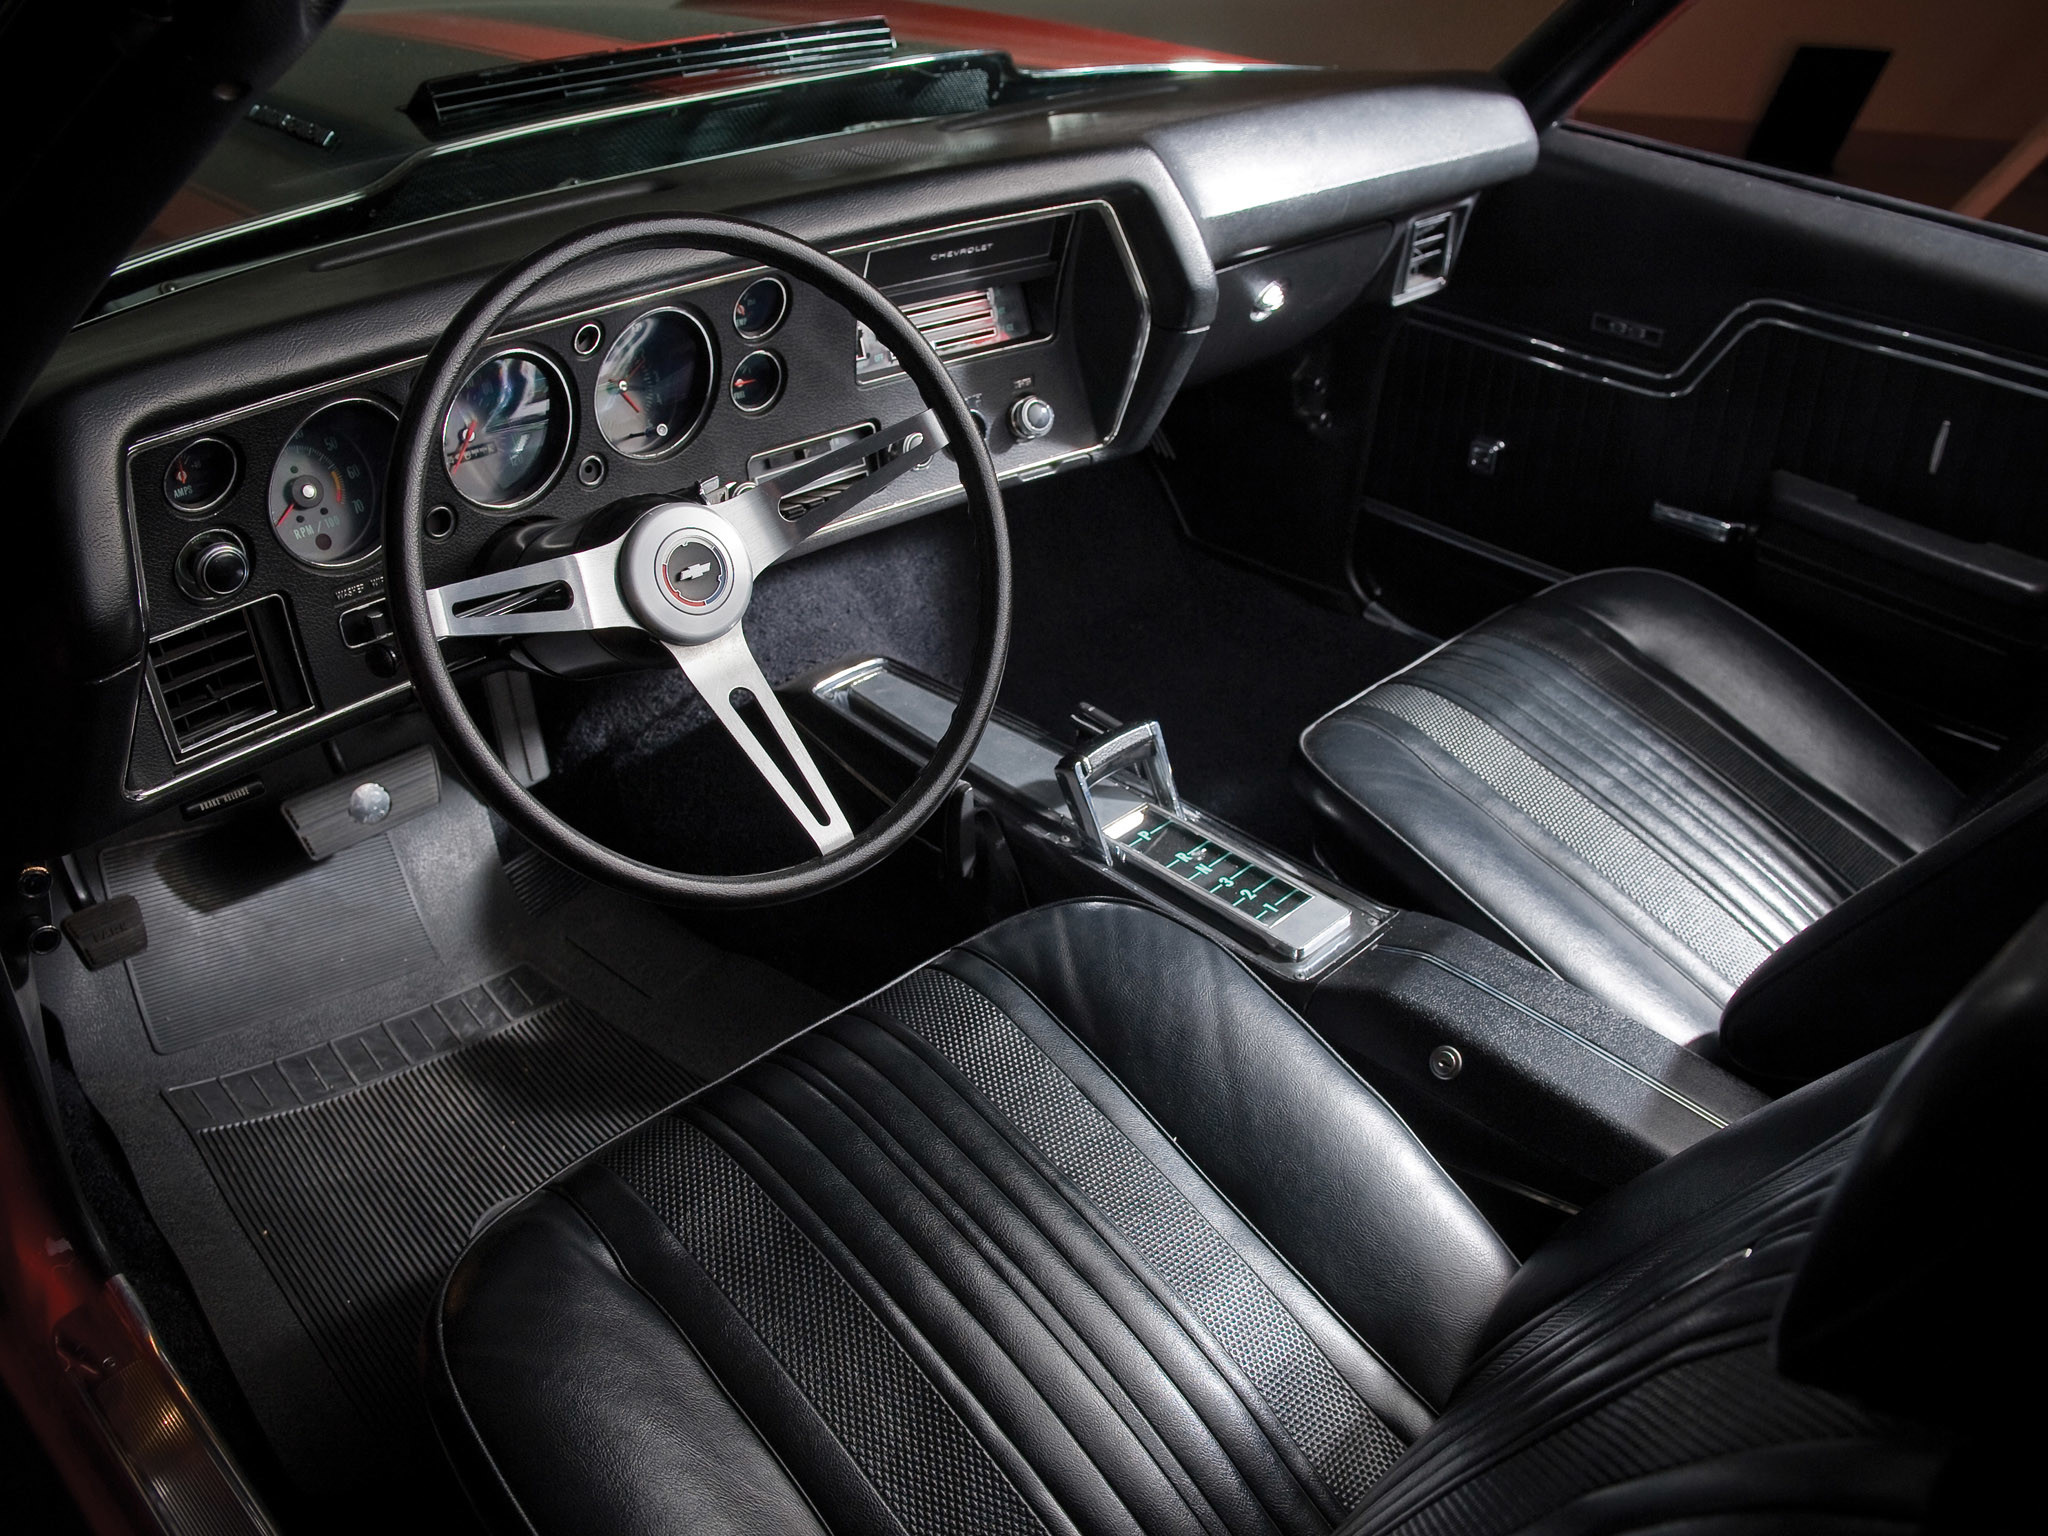 2048x1536 1970 Chevrolet Chevelle S-S 454 PRO LS6 Convertible classic muscle interior  wallpaper |  | 108722 | WallpaperUP